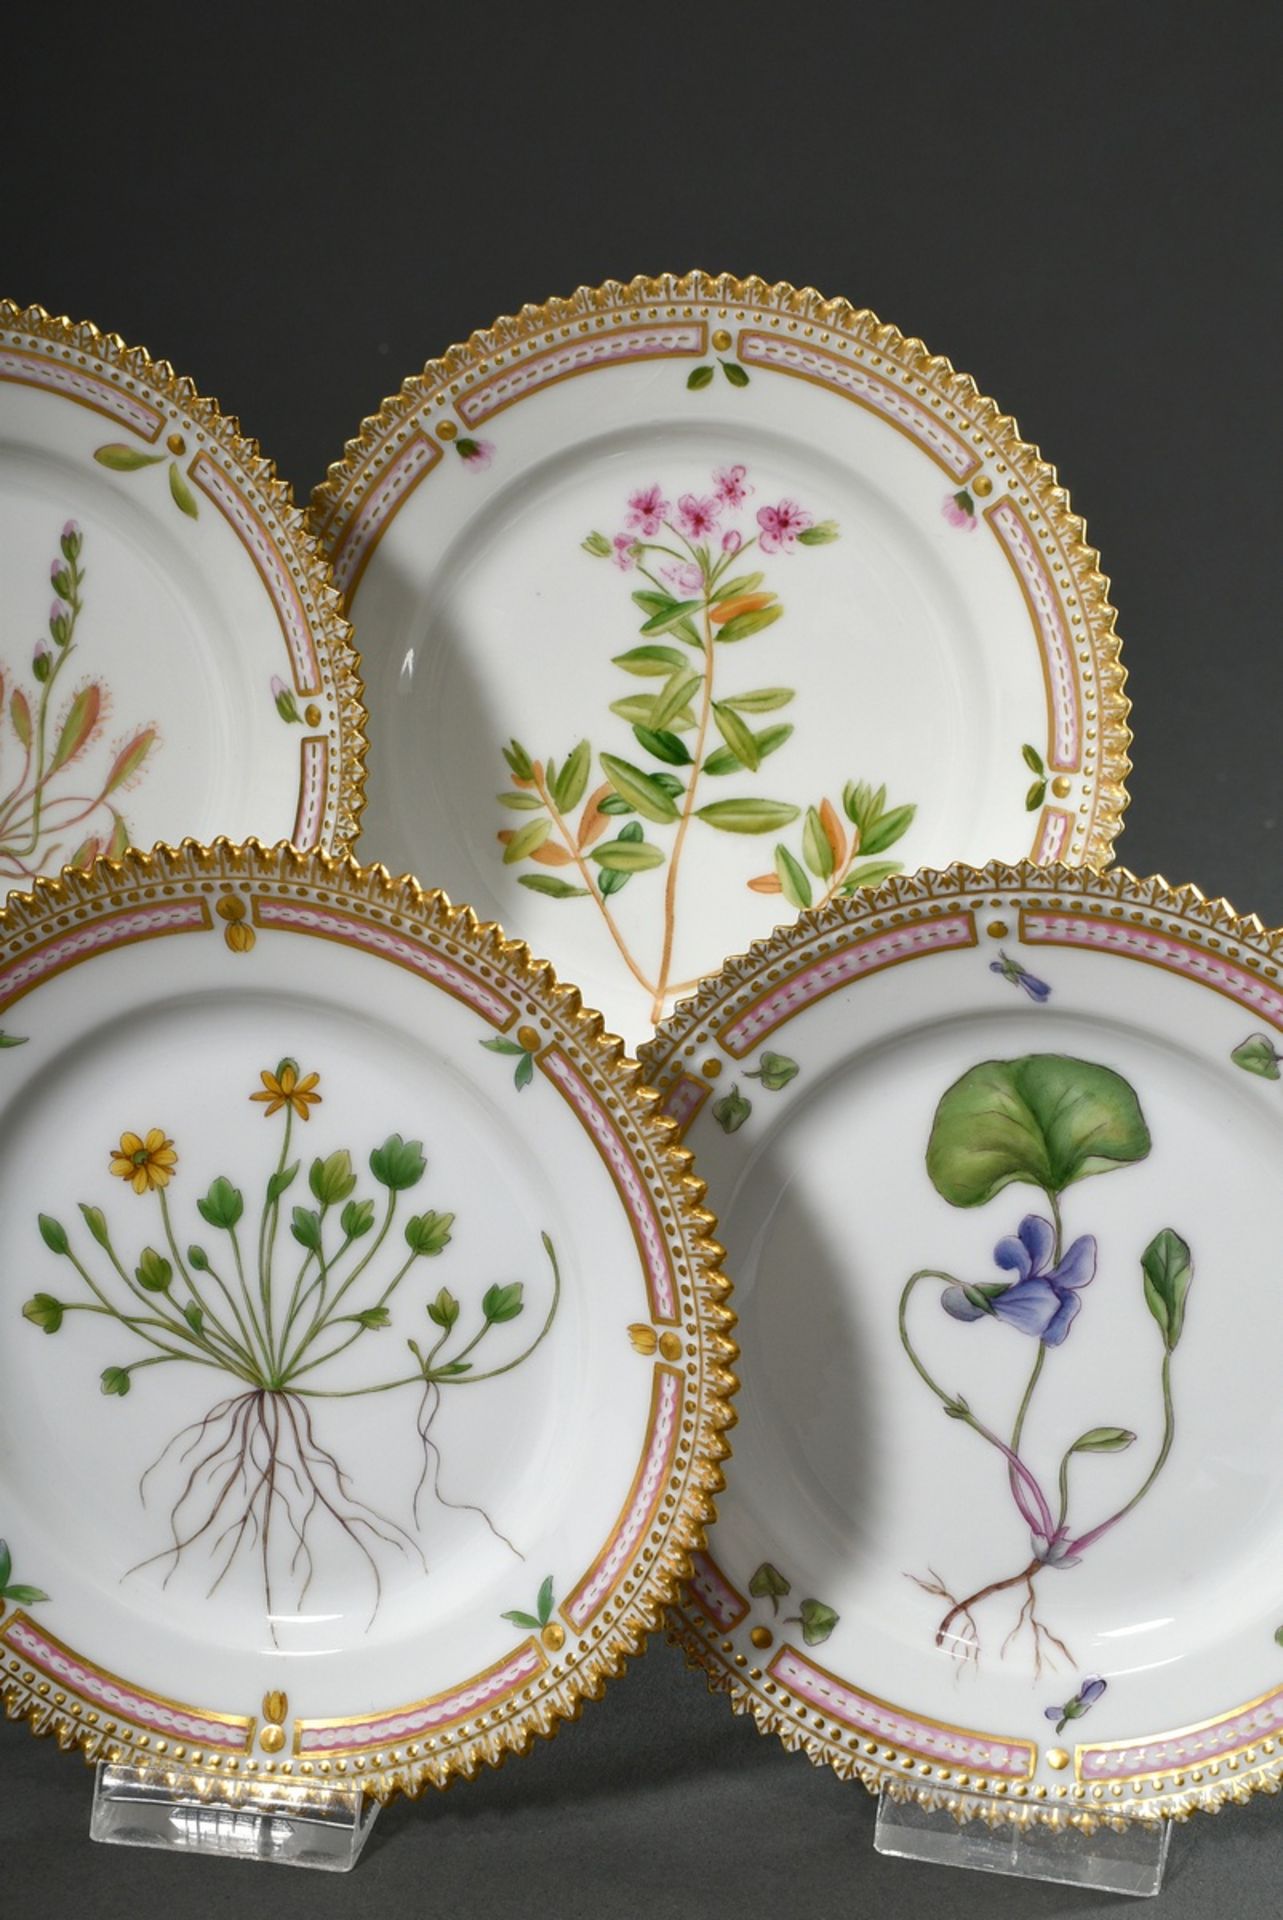 7 Royal Copenhagen "Flora Danica" bread plate with polychrome painting in the mirror and gold decor - Image 2 of 13